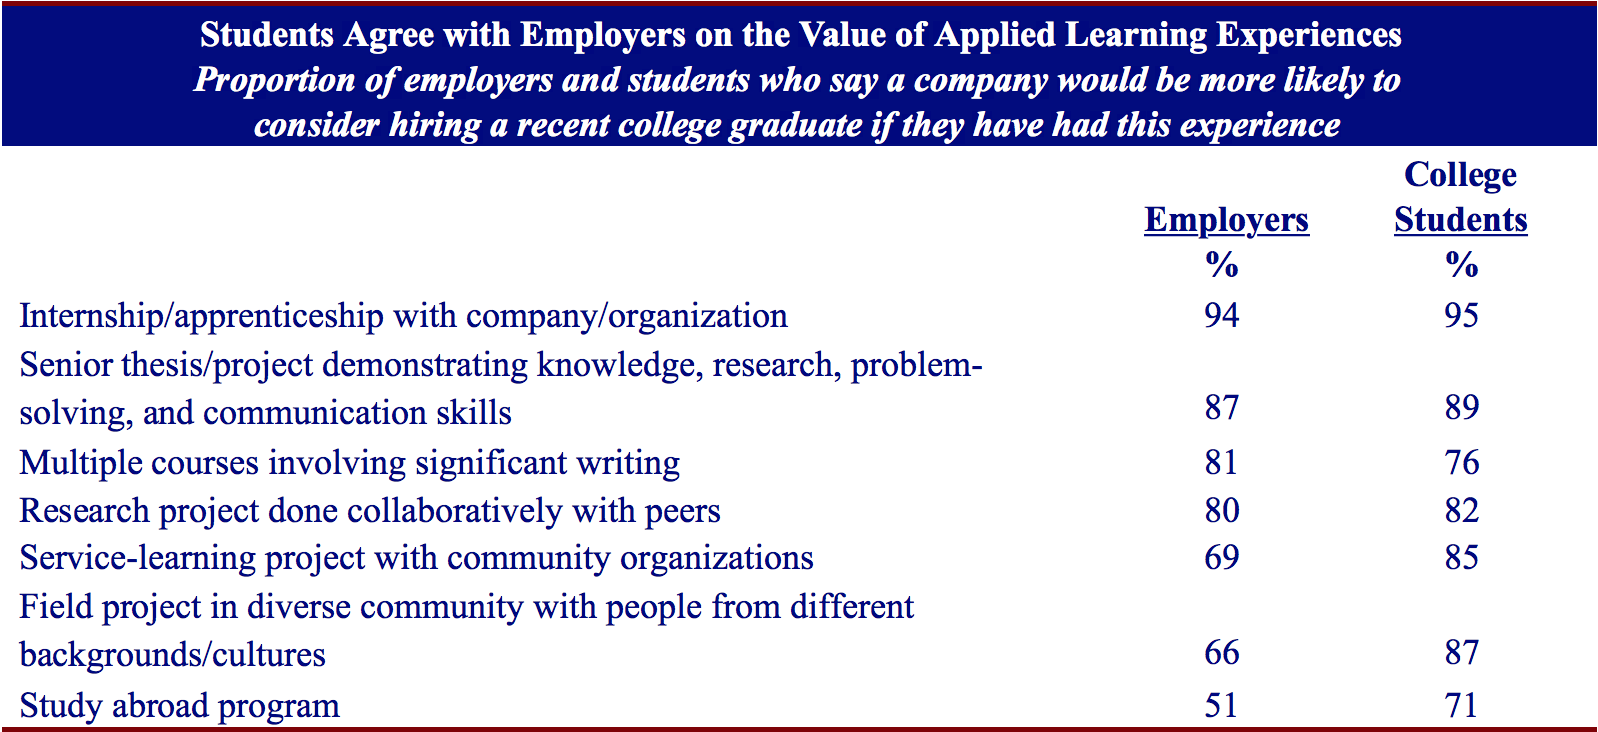 The table shows which applied learning experiences employers and students value most. The highest value placed by both stakeholders is on internships, senior theses, coursework and collaborative work, and service-learning, field projects, and study abroad programs rounding out the list.